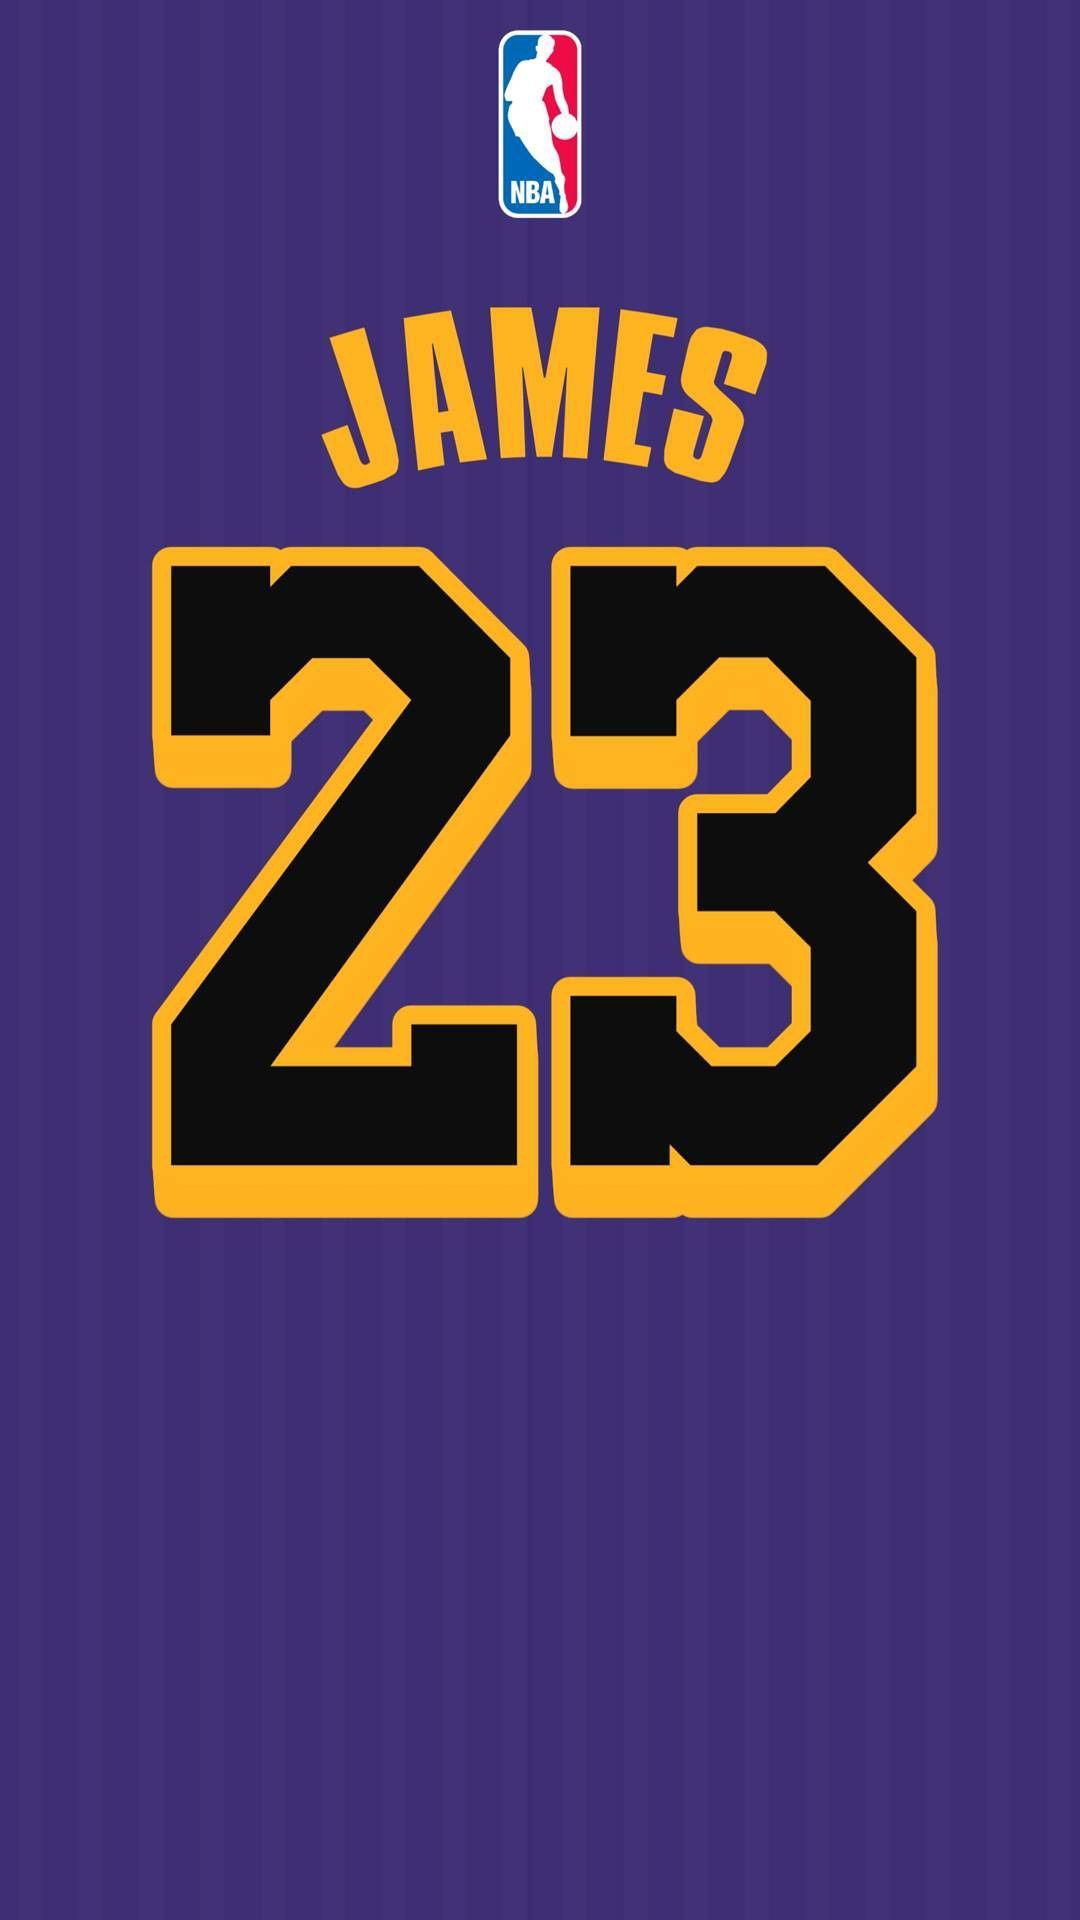 Lebron in lakers jersey s on